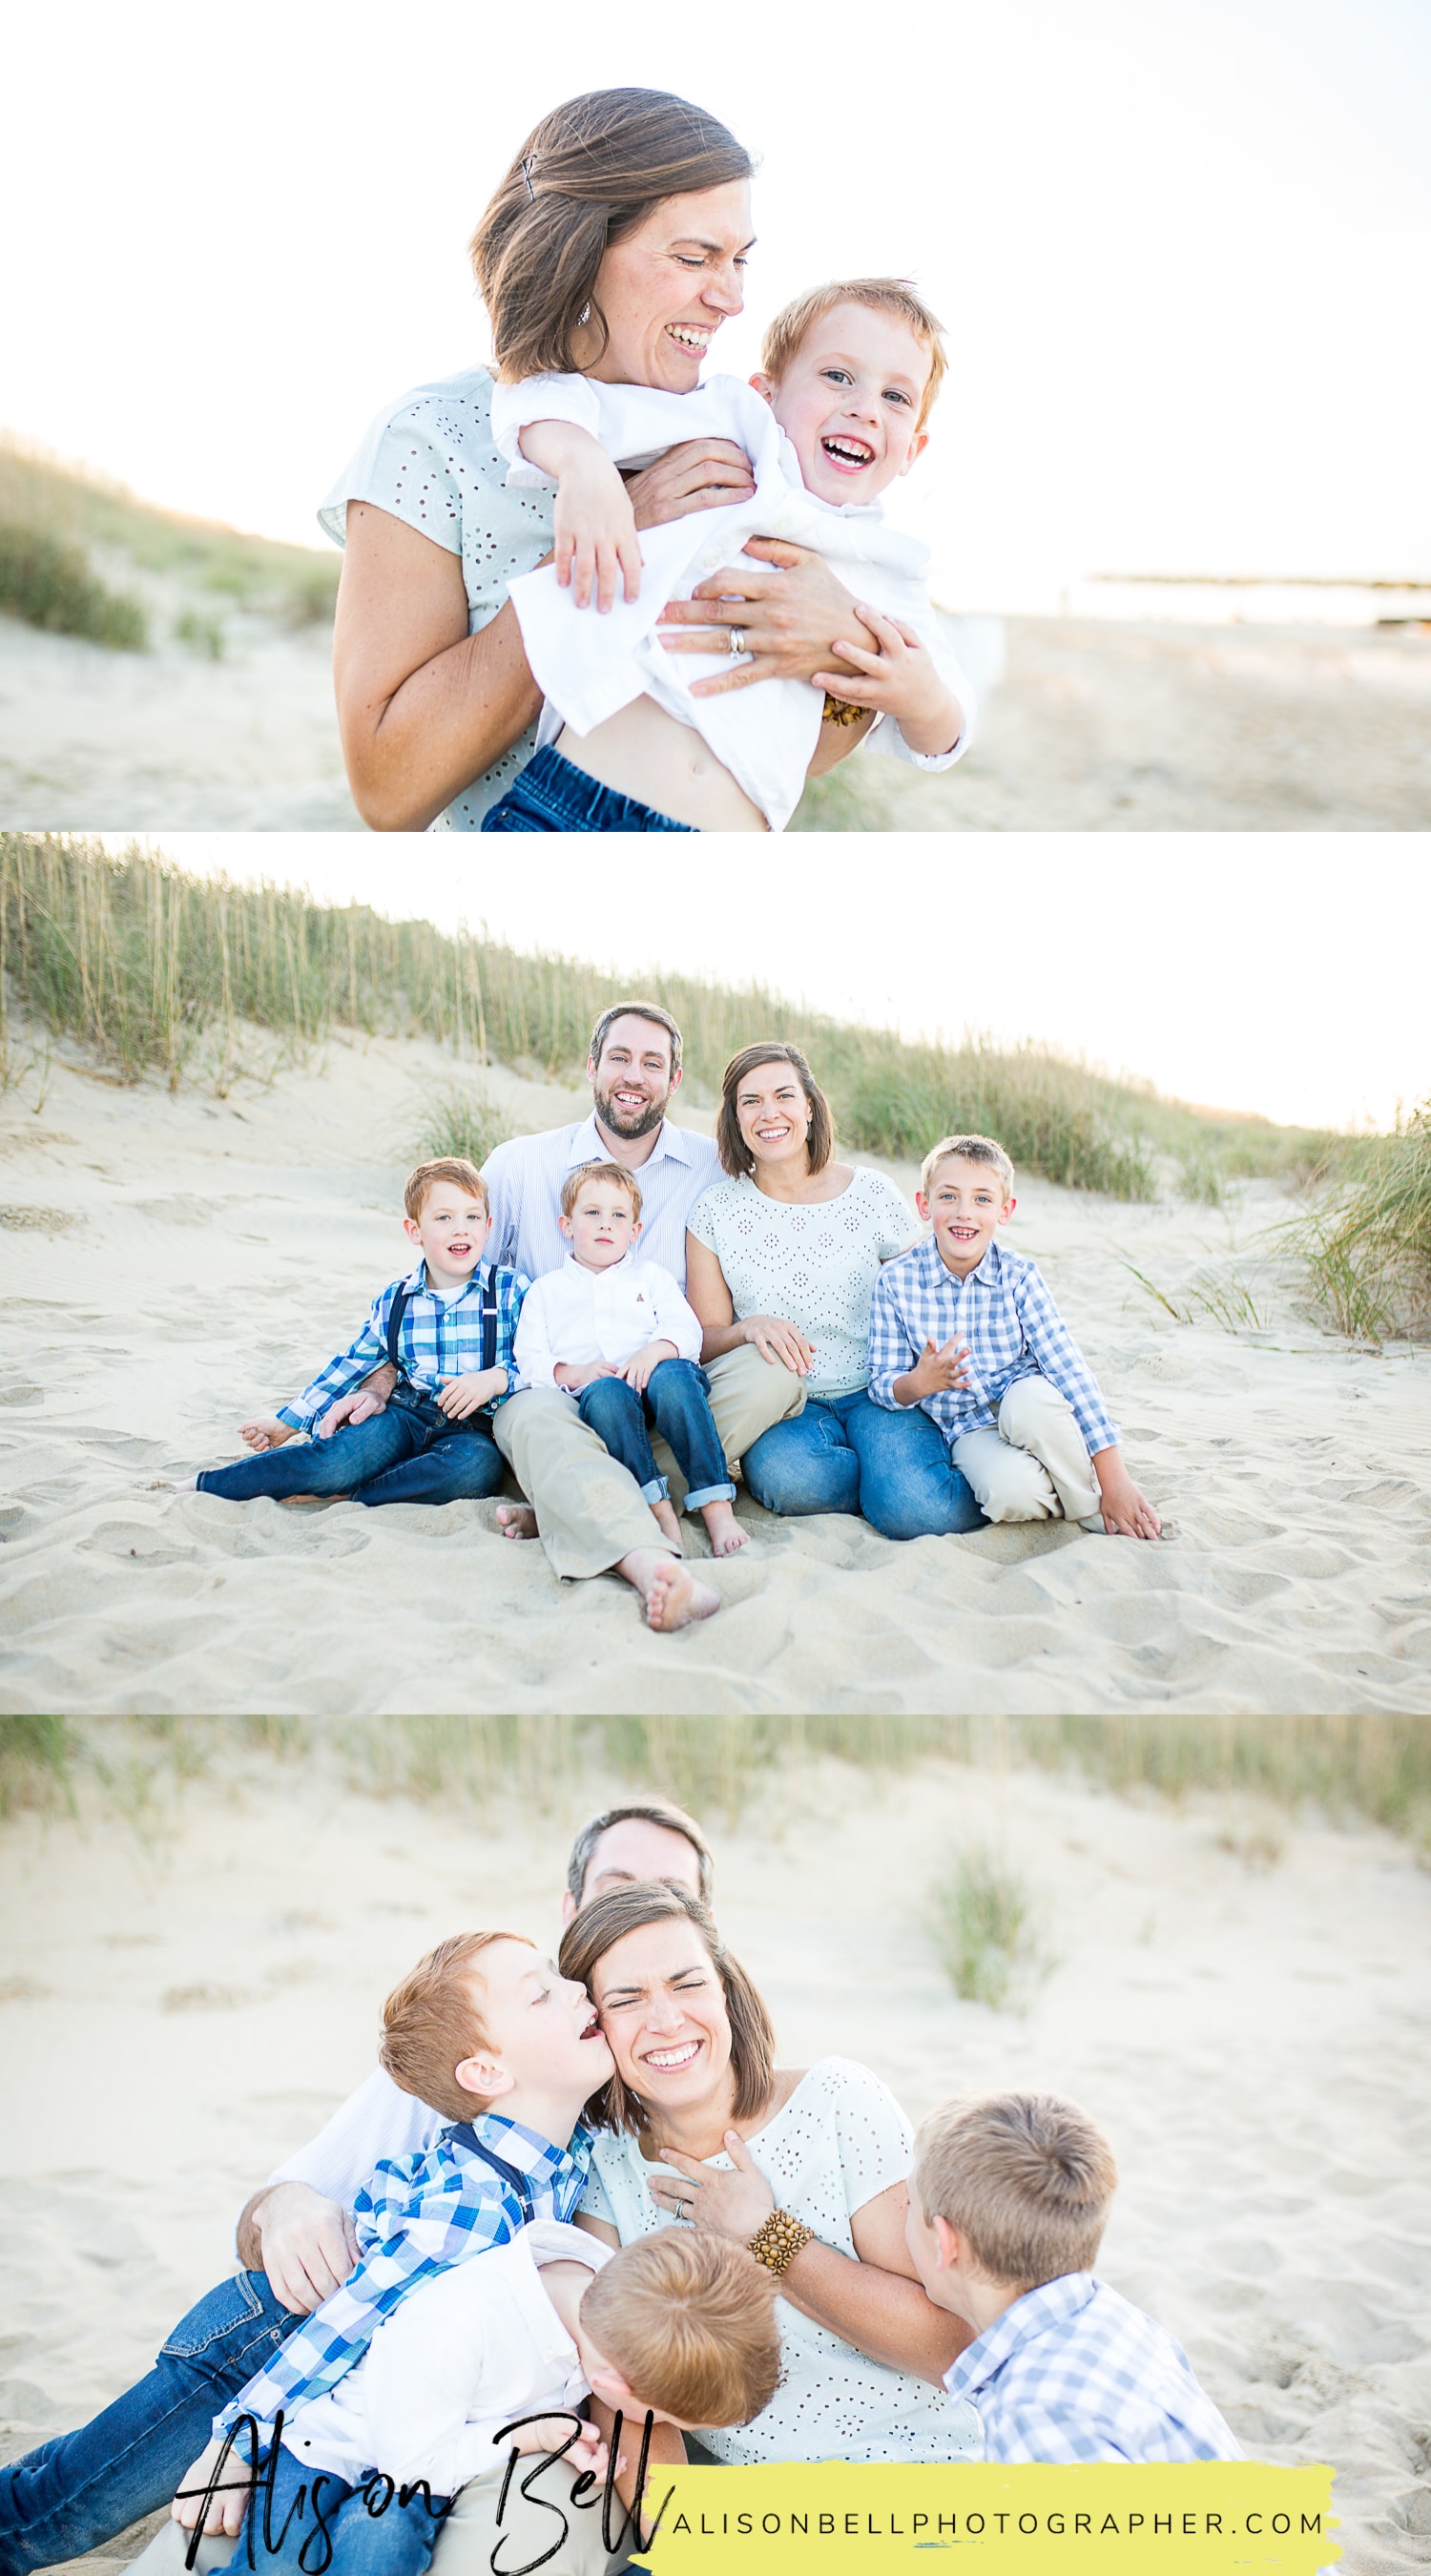 East beach Norfolk mini family photo session by alison bell photographer